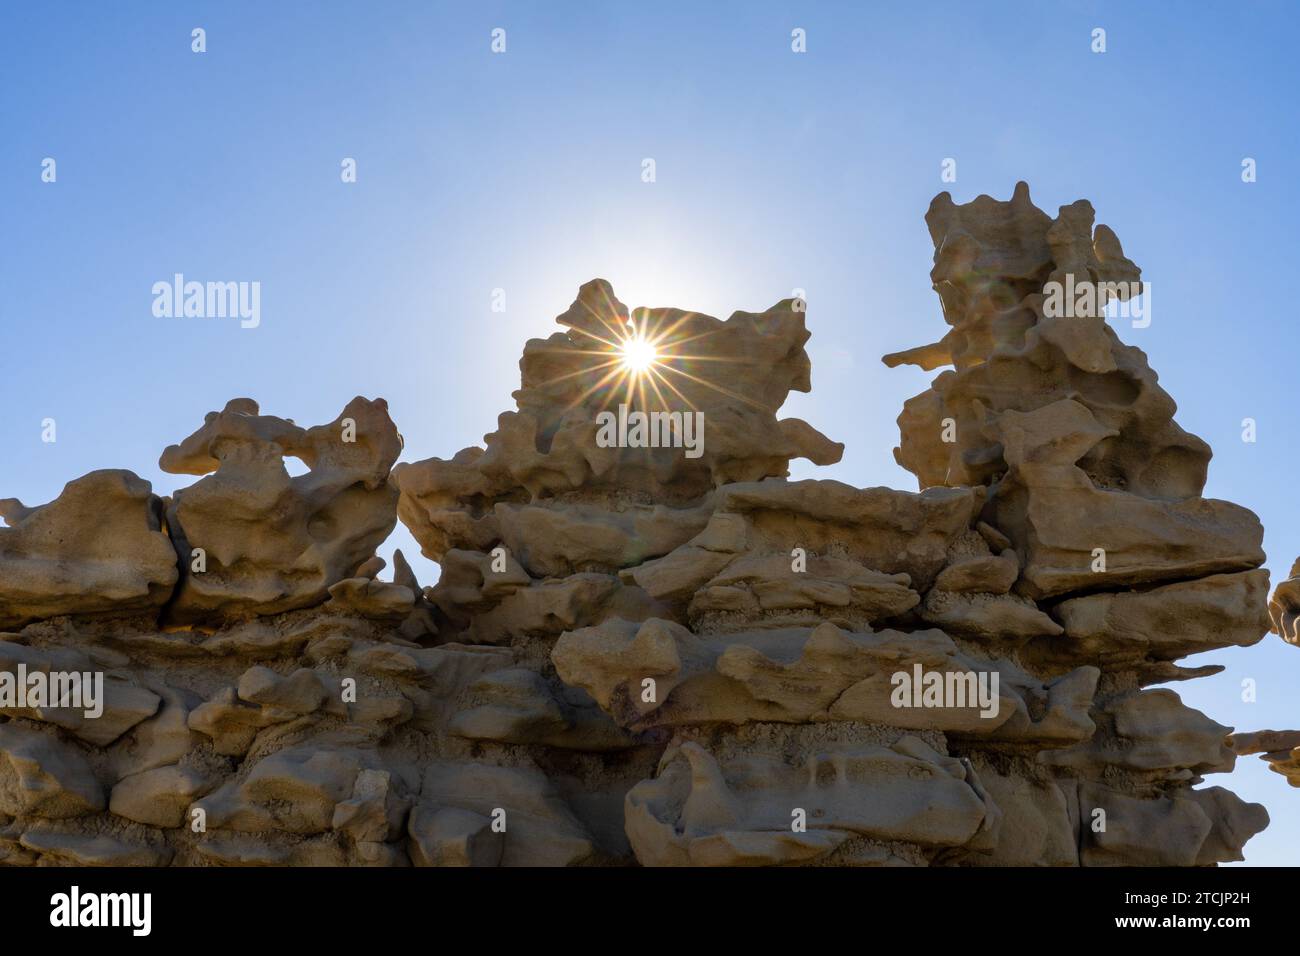 A sunburst through the fantastically eroded sandstone formations in the Fantasy Canyon Recreation Site, near Vernal, Utah. Stock Photo